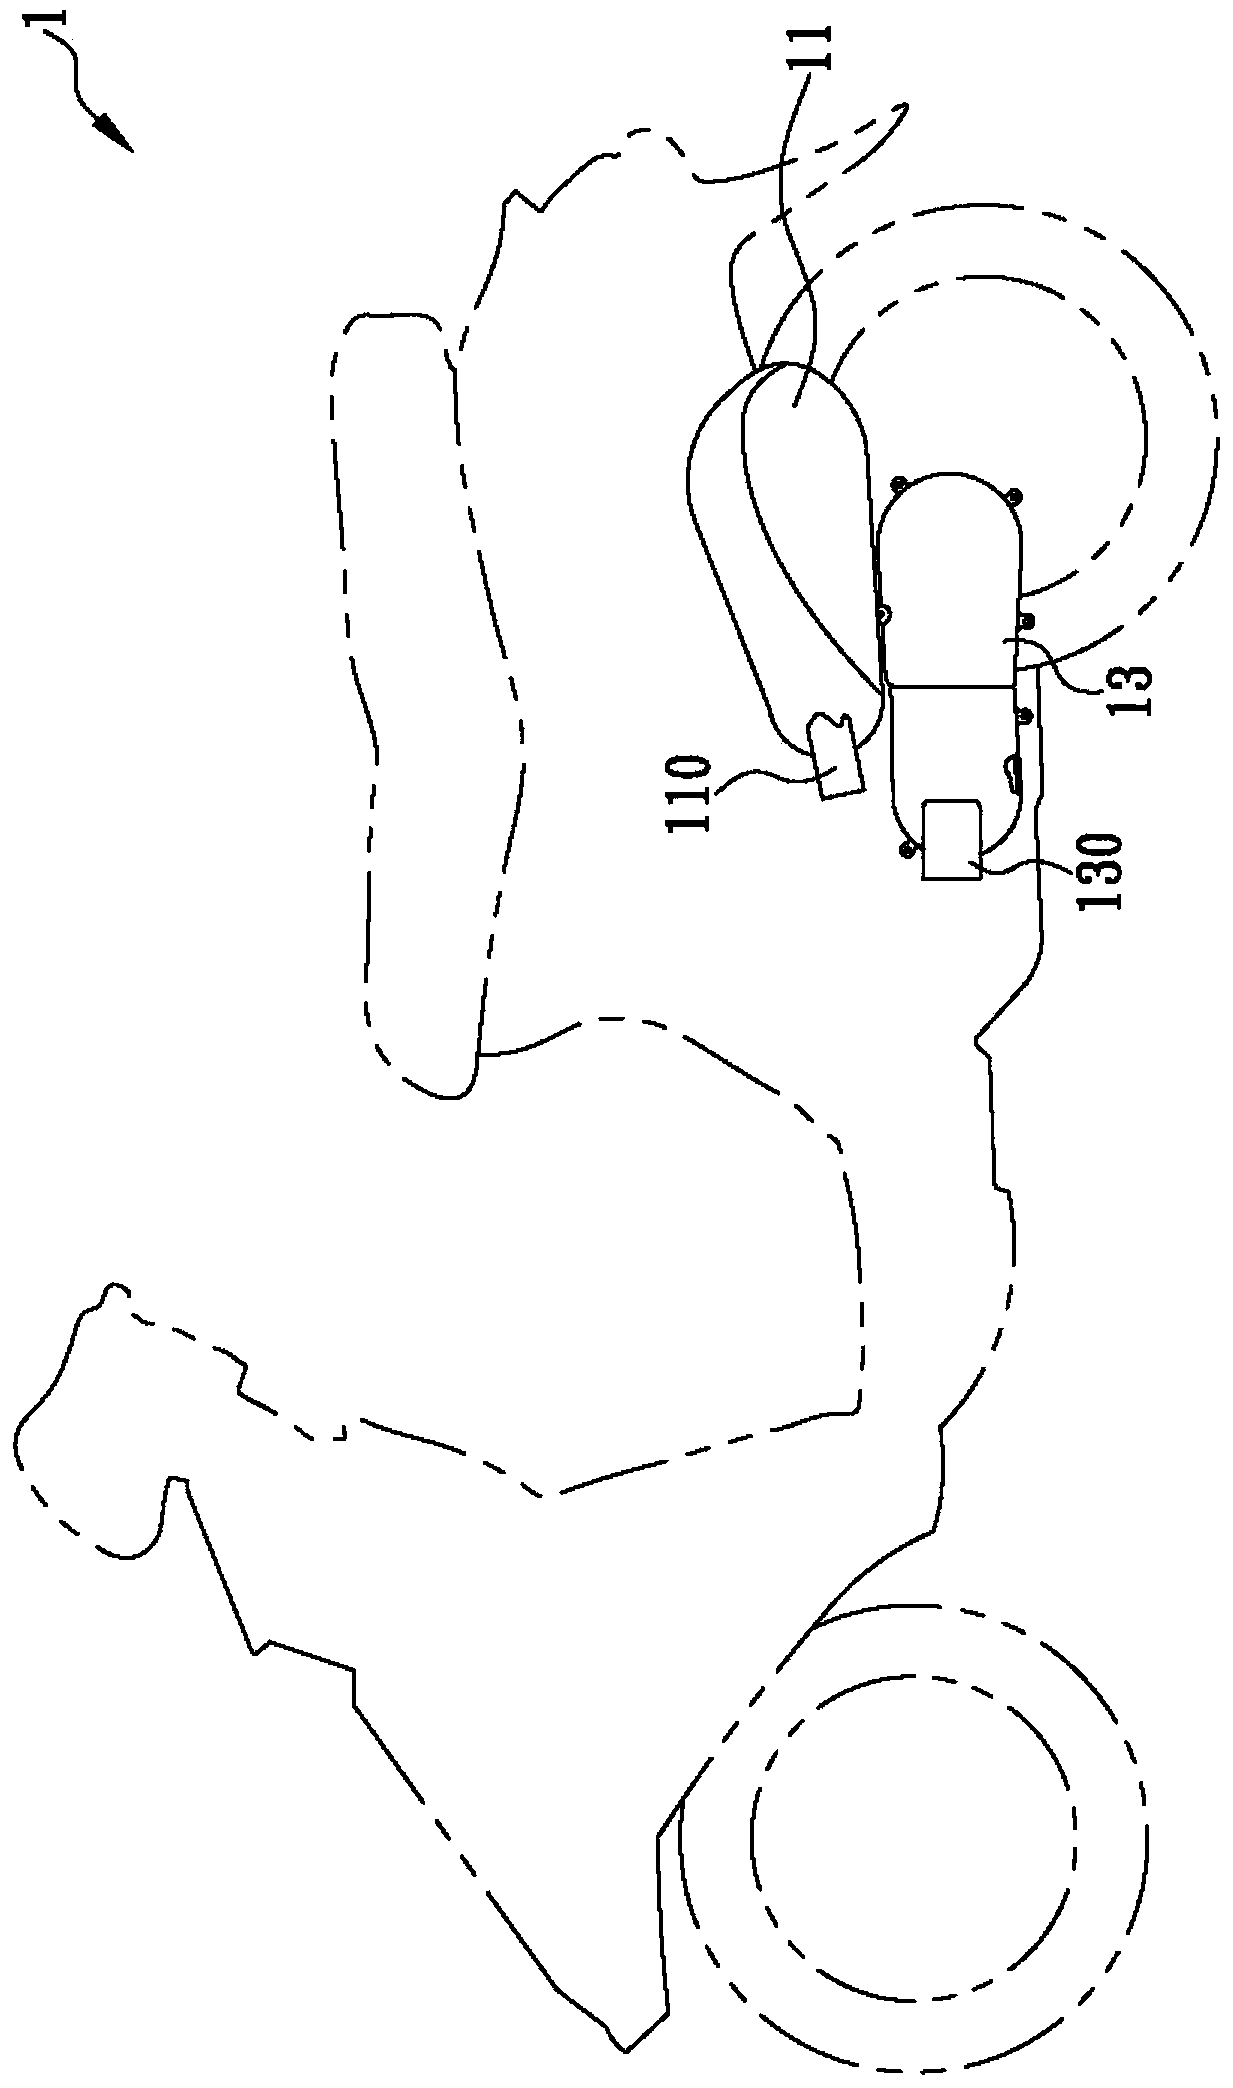 Intake structure of motorcycle with diversion function